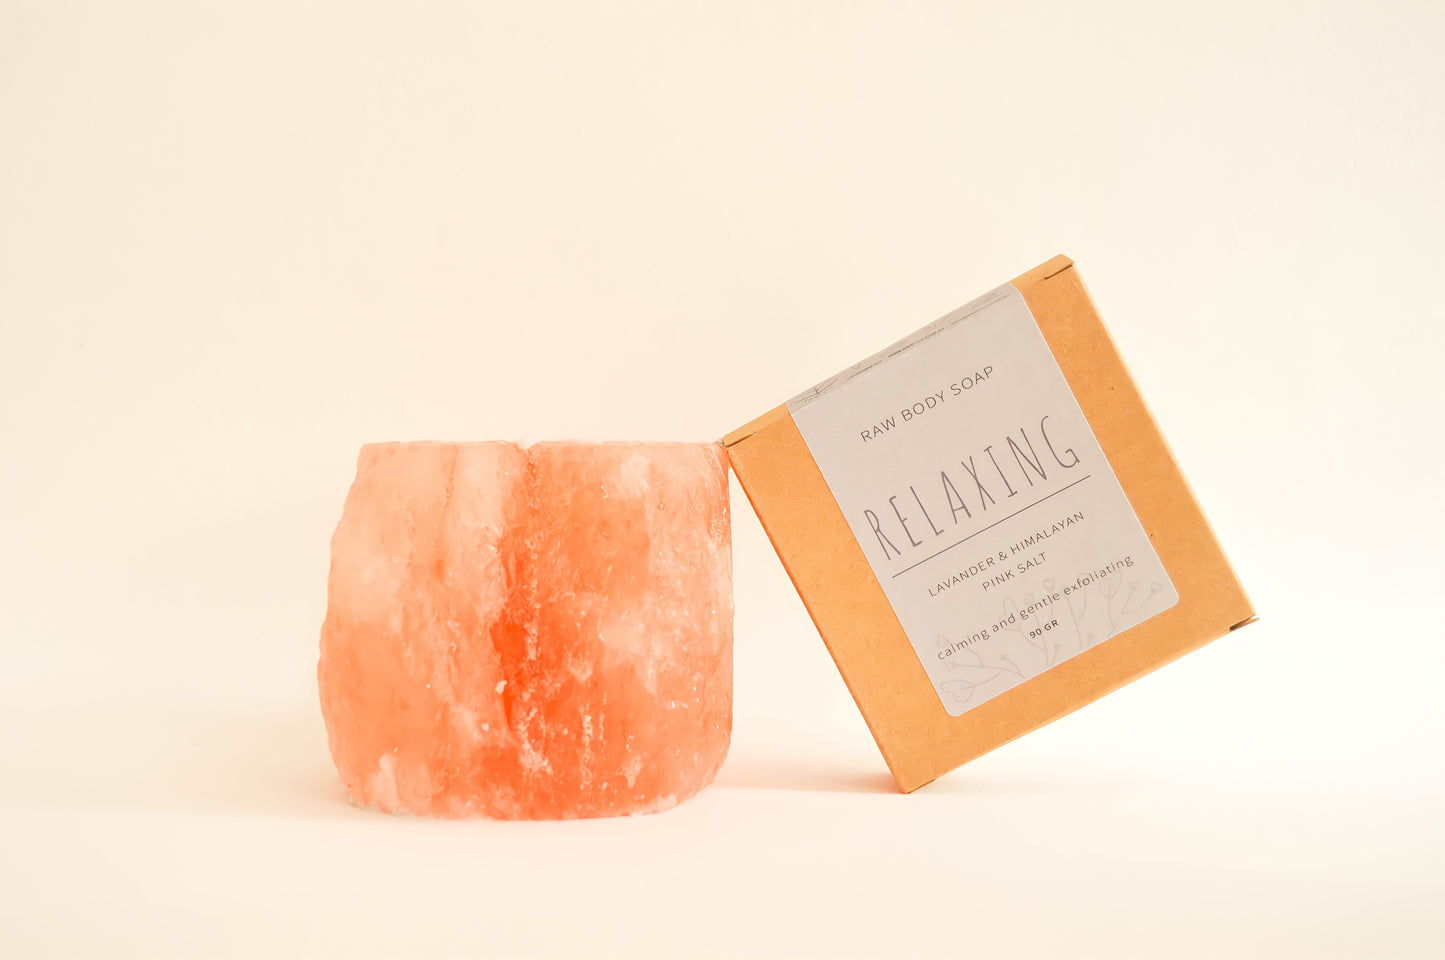 RAW BODY SOAP BAR - RELAXING with exfoliating  himalayan pink salt & Lavender